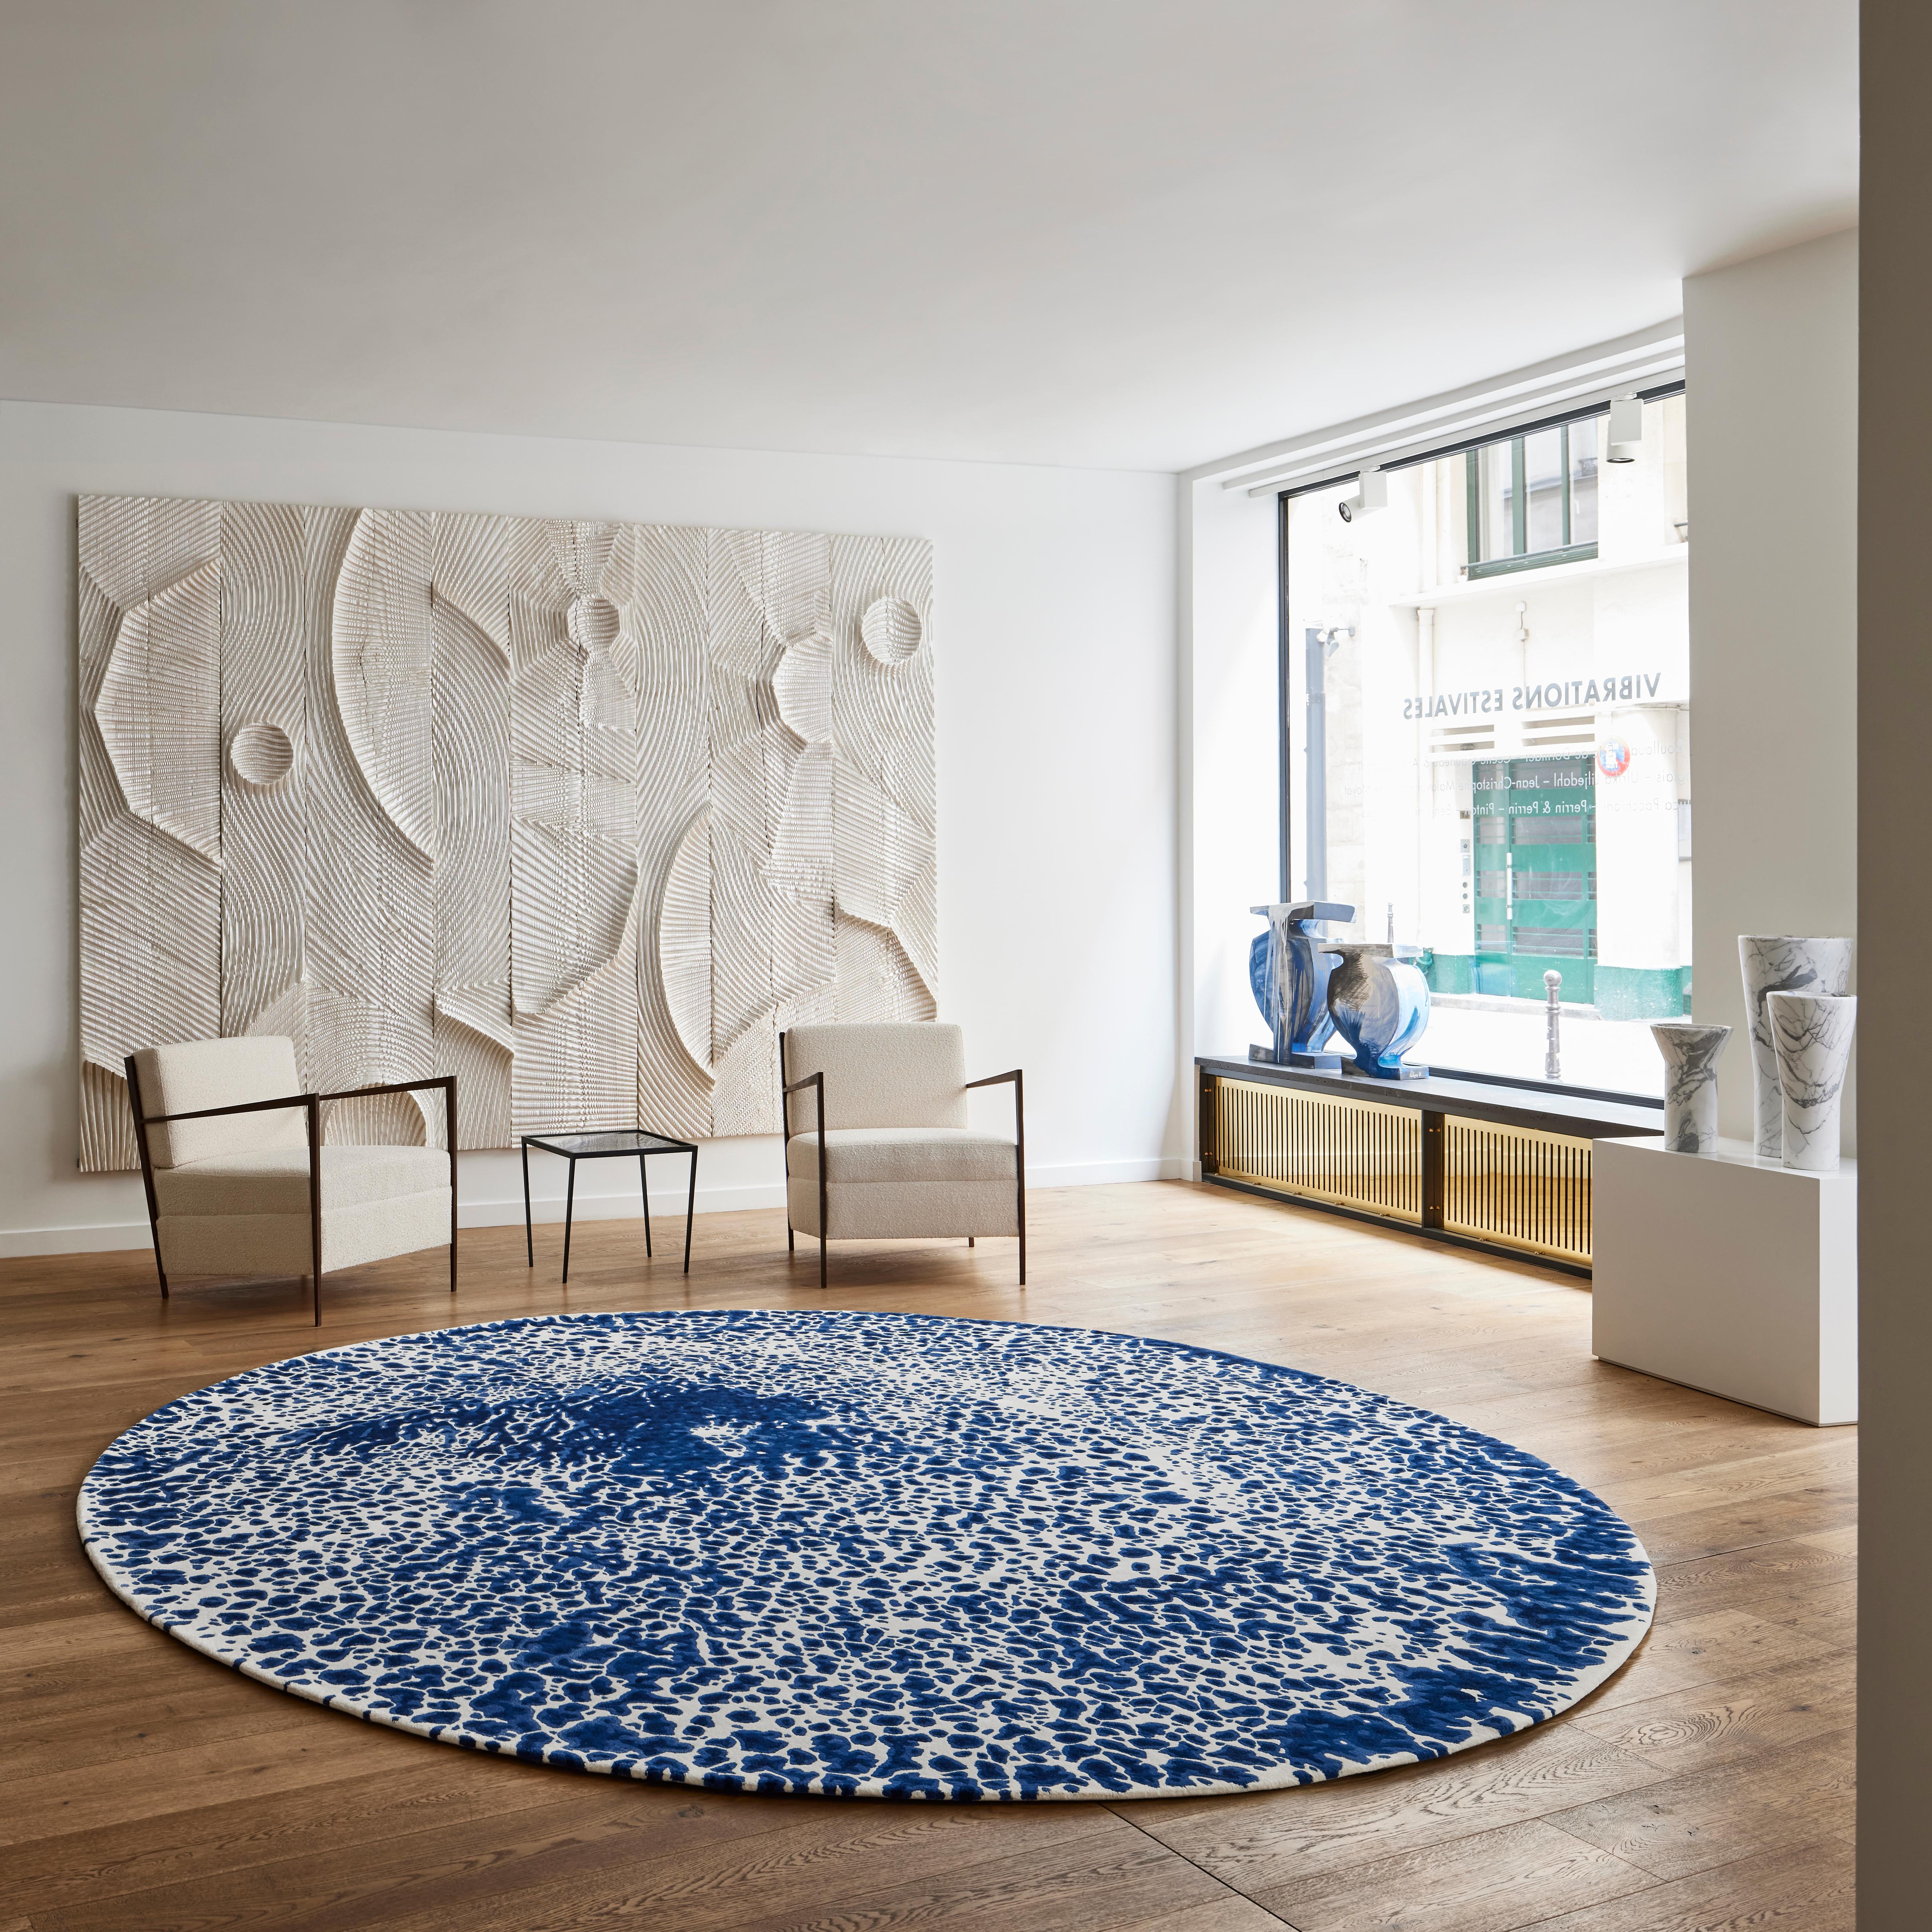 Pléiade, Rug made by Ateliers Maison Pinton, from a Perrin&Perrin design. Wool, silk, cotton and bamboo. Ø 300 cm / Ø 118,1 in. Limited Edition of 6

For over 150 years, Pinton has been perpetuating the savoir-faire of the Royal Manufacture of